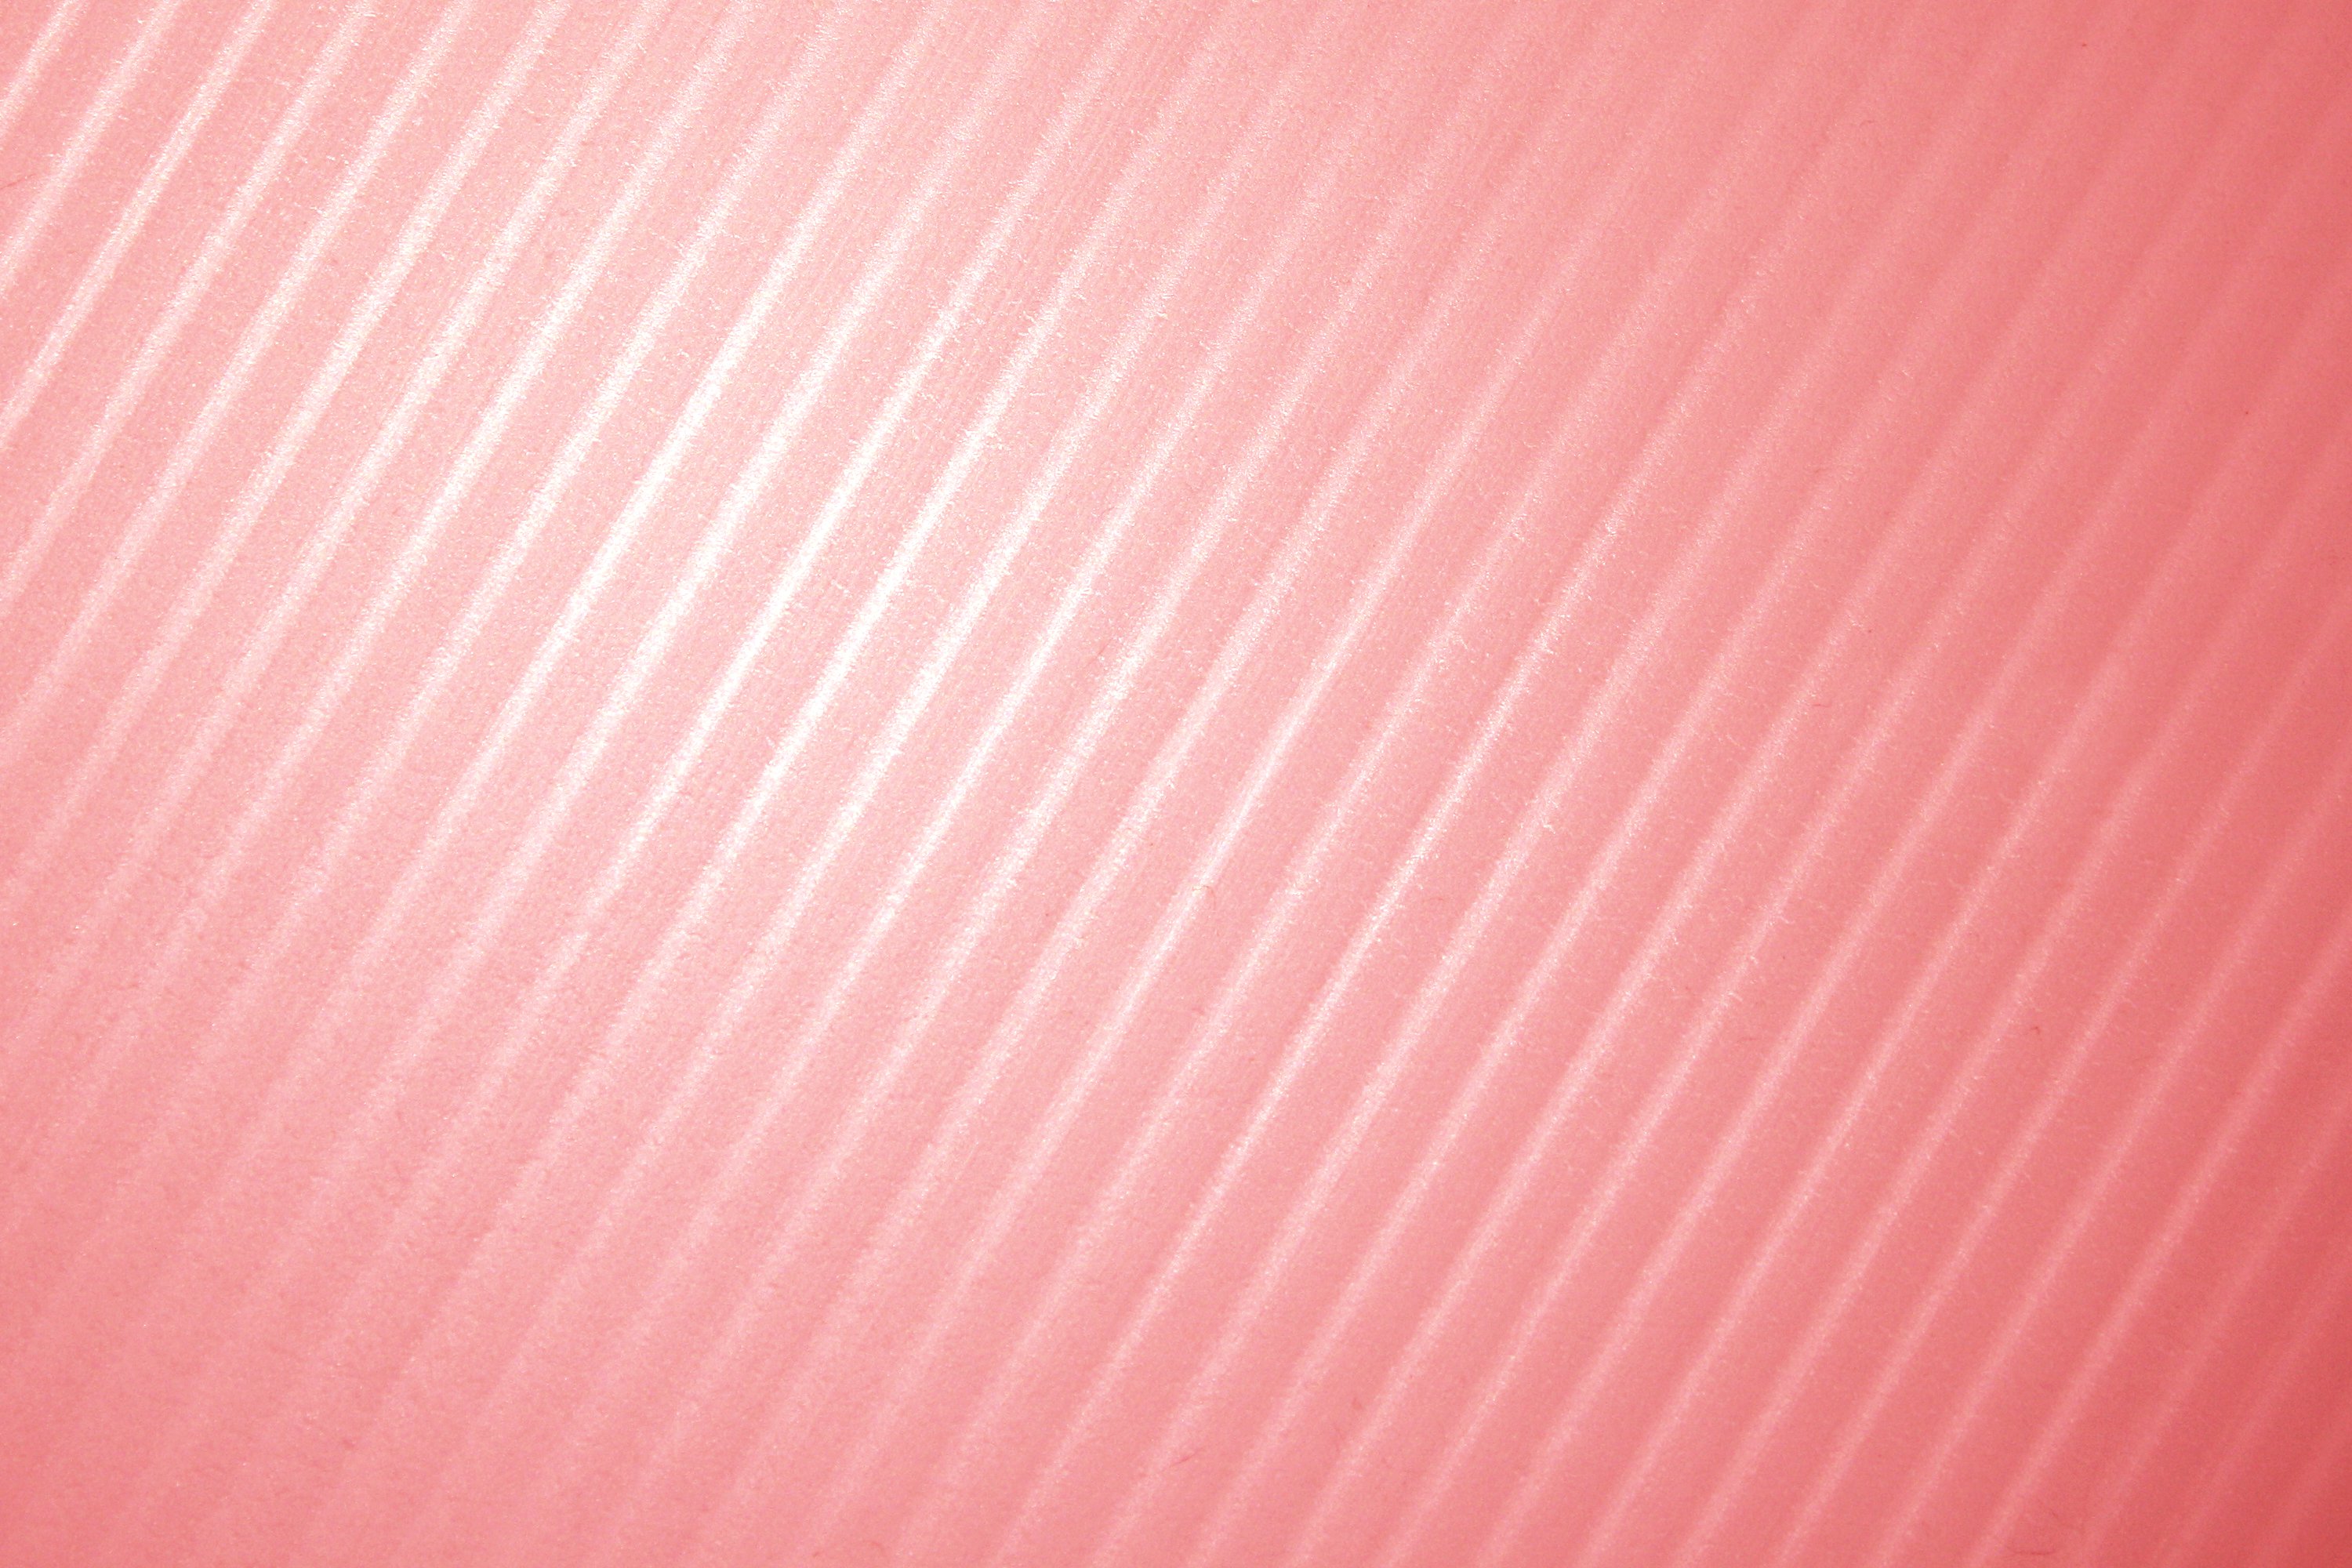 Salmon Red Diagonal Striped Plastic Texture Picture | Free ...